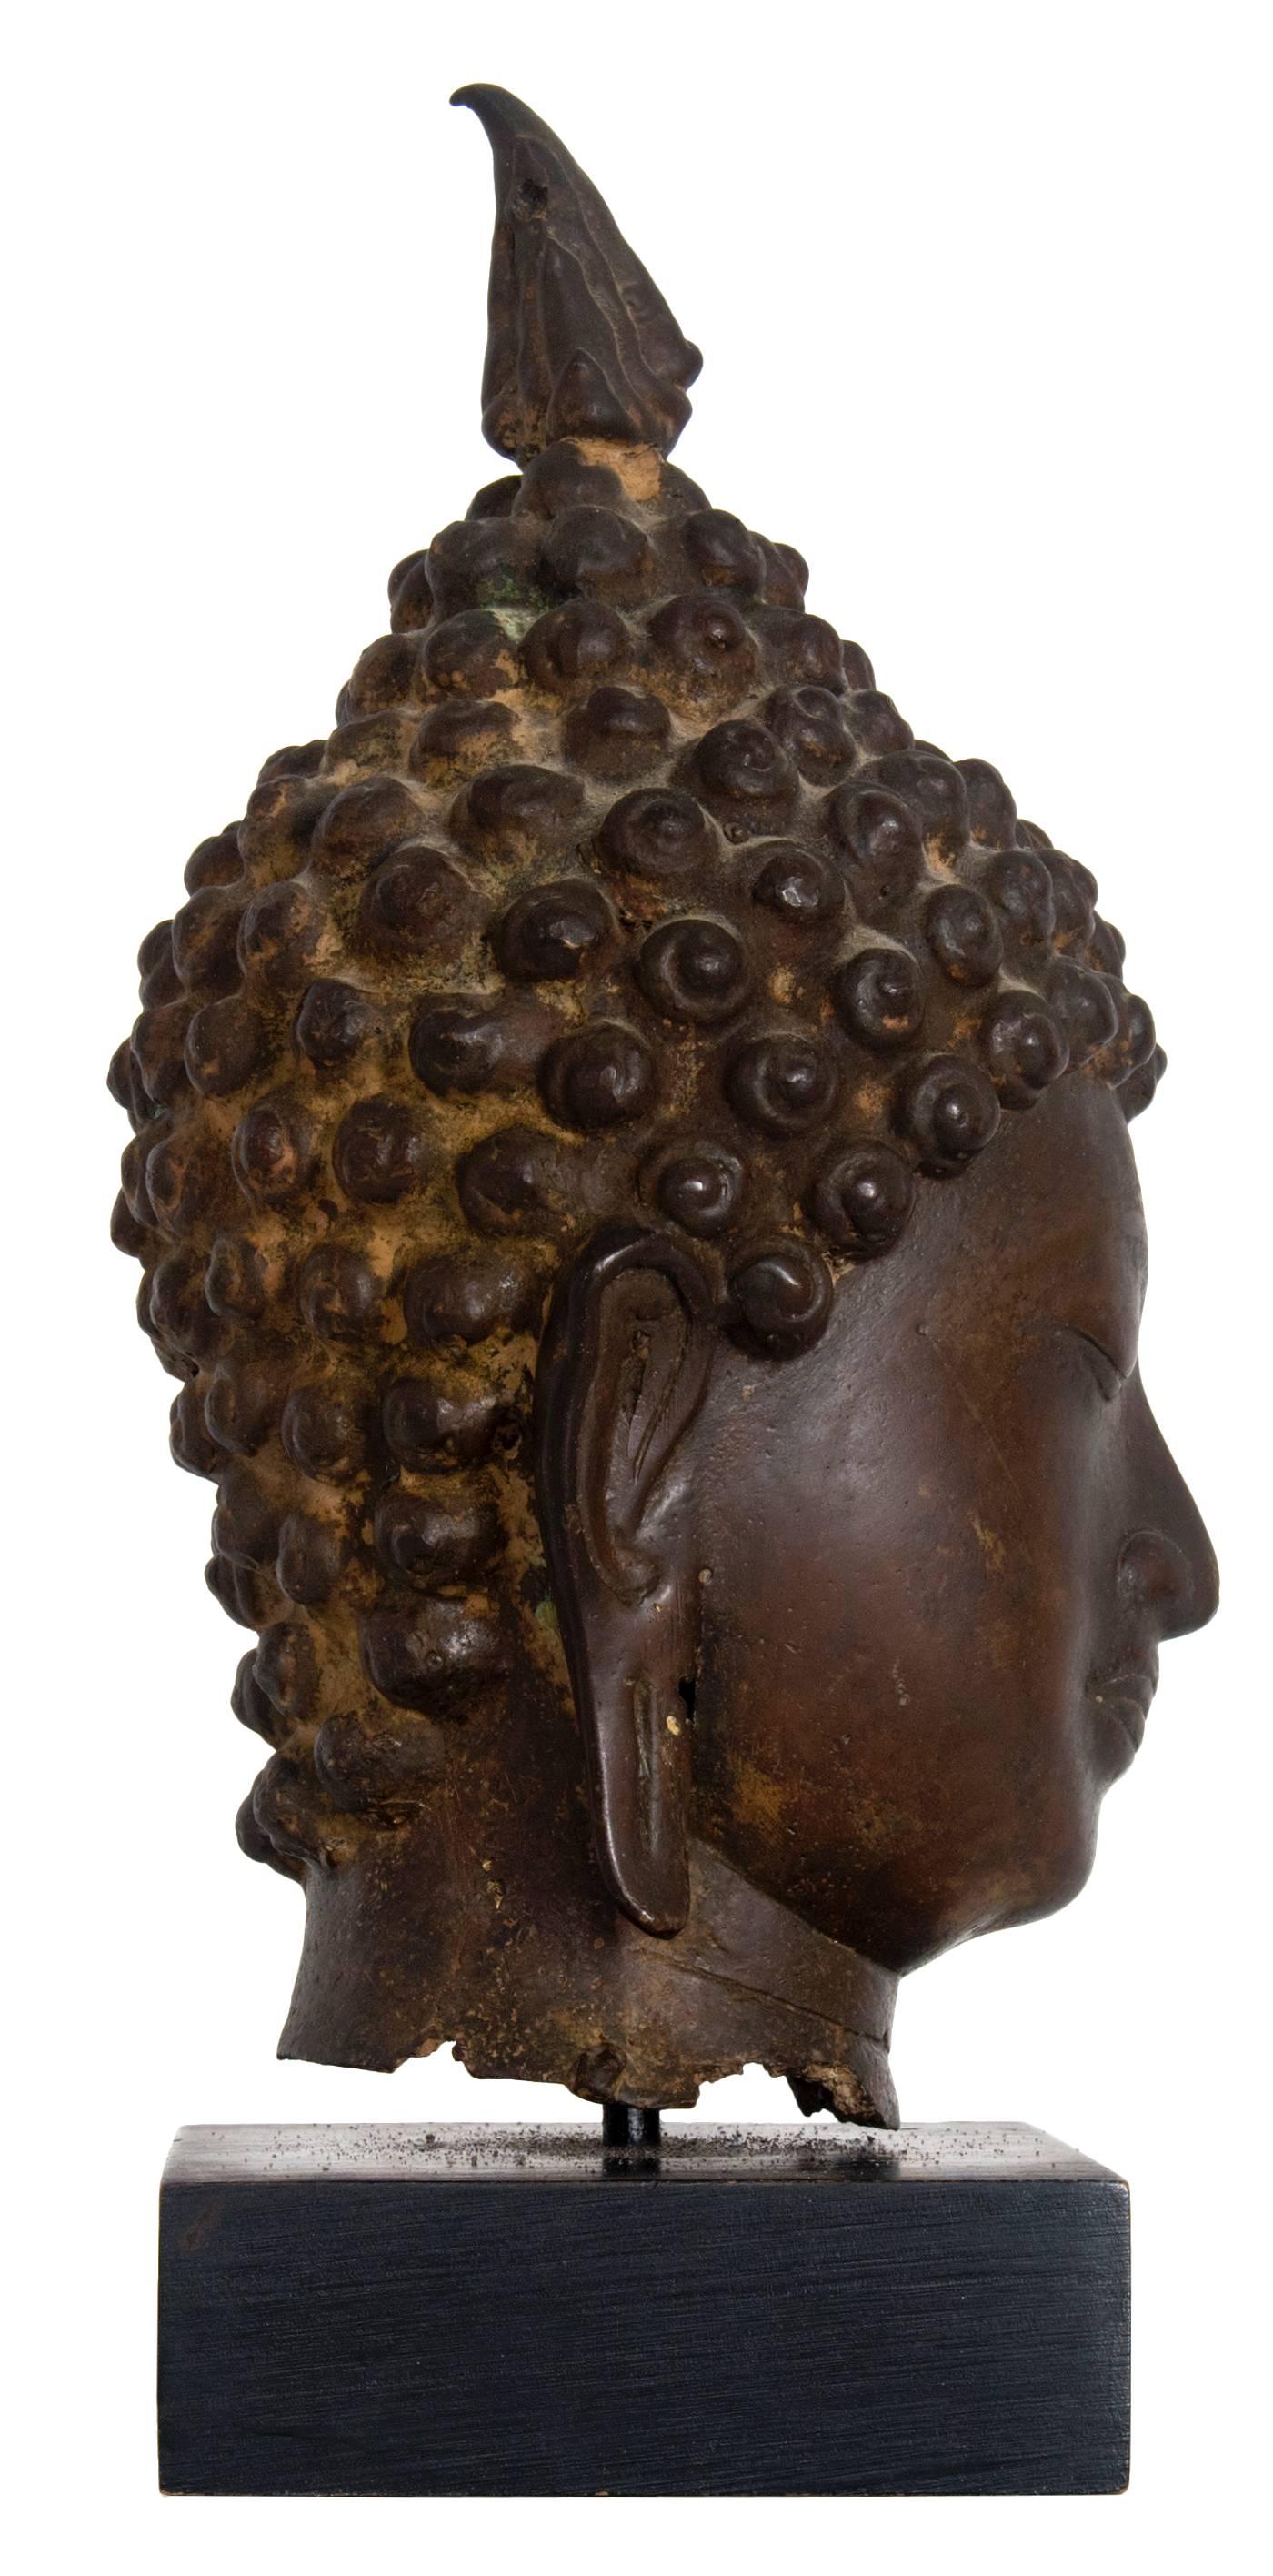 Bronze Buddha head, probably Thailand, circa 1900.
Height of head without base is 9